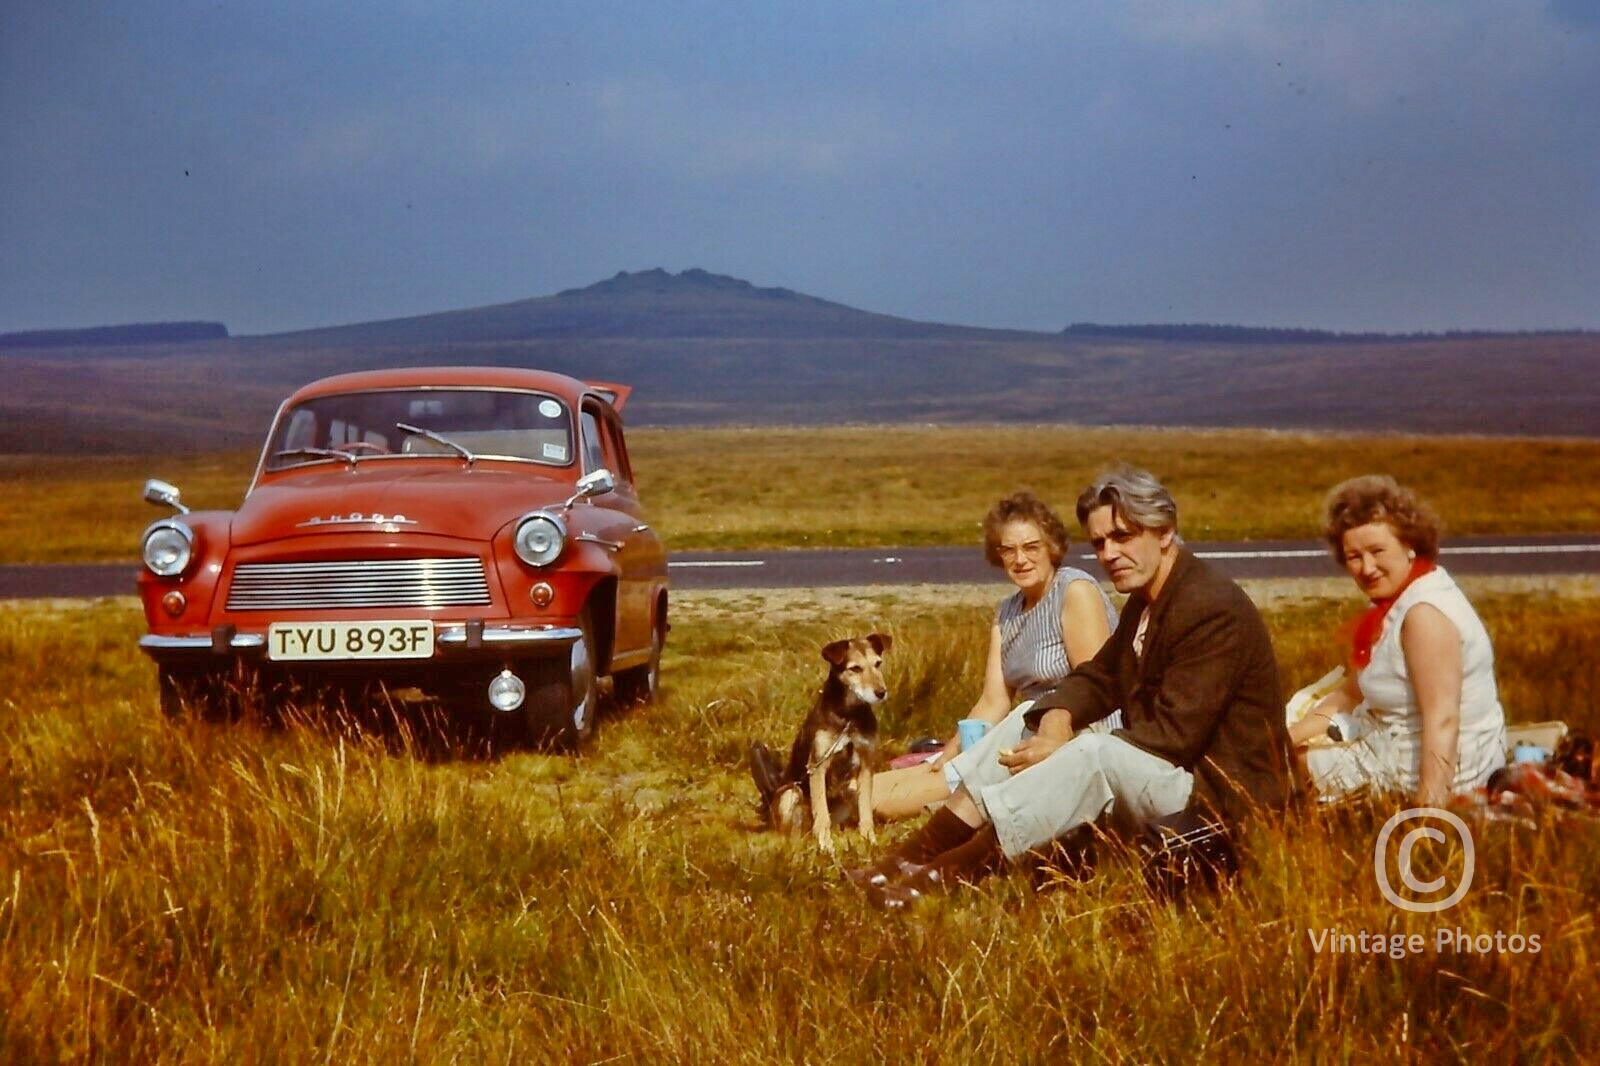 1967 Red Skoda and road side family picnic on the Moors